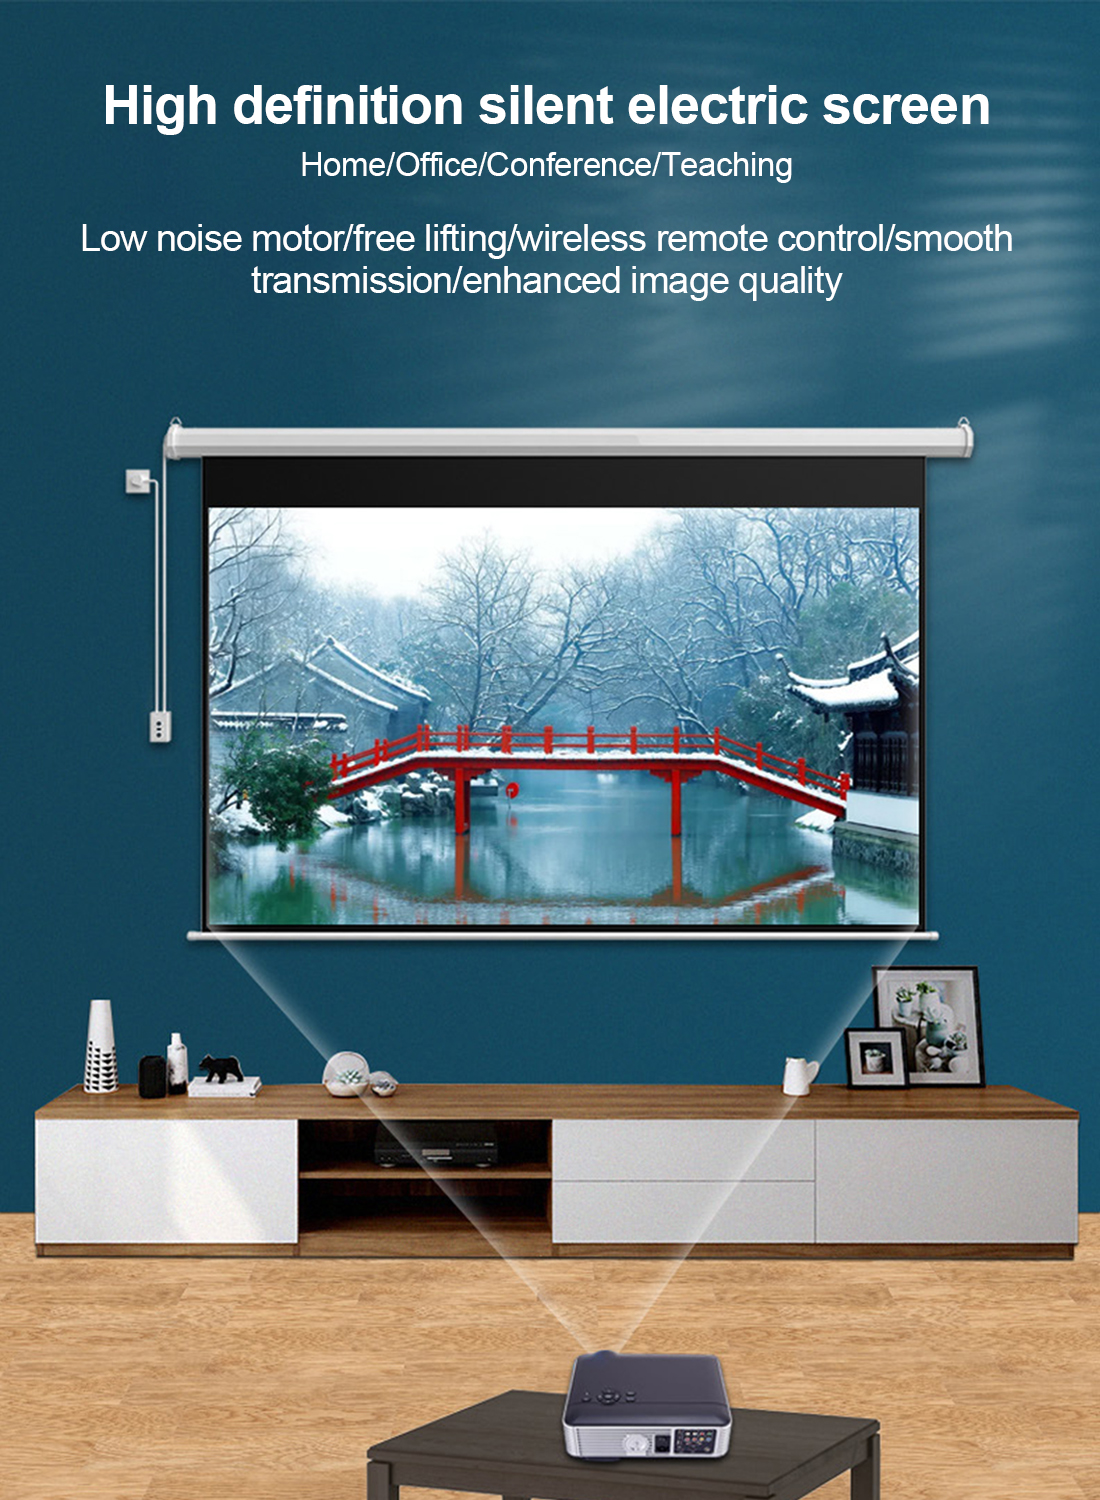 72 Inch 4:3 Wall Mount Electric Projector Screen Motorized Projection Curtain with Remote Control For Business/School/Office/Meeting